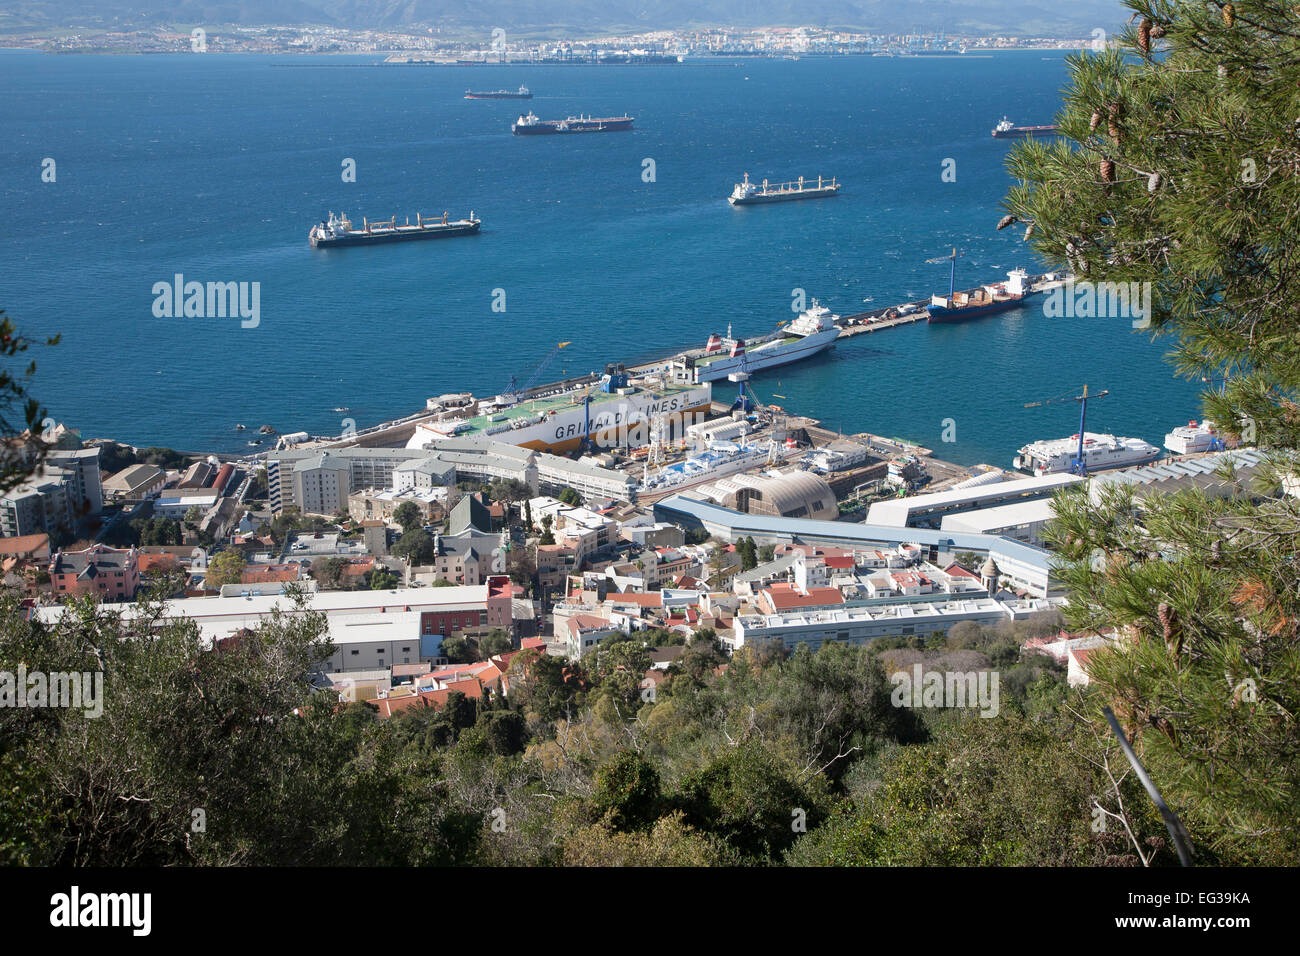 View over docks and shipyard warehouses in Gibraltar, British territory in southern Europe Stock Photo